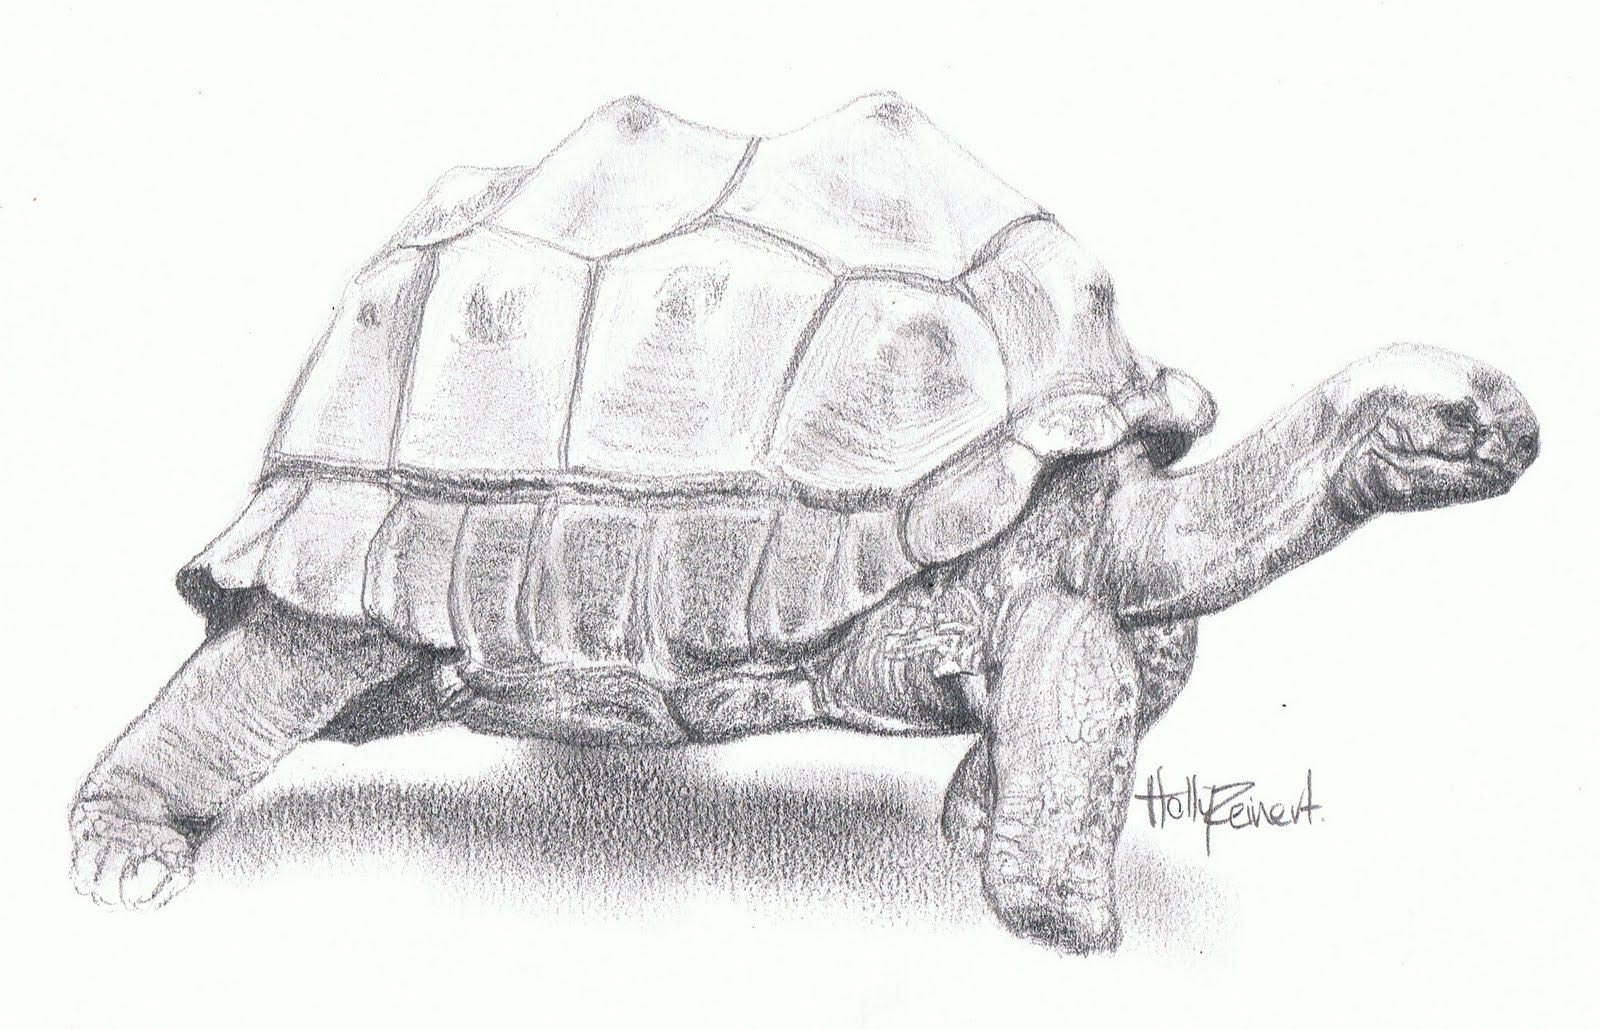 Turtle drawing reference